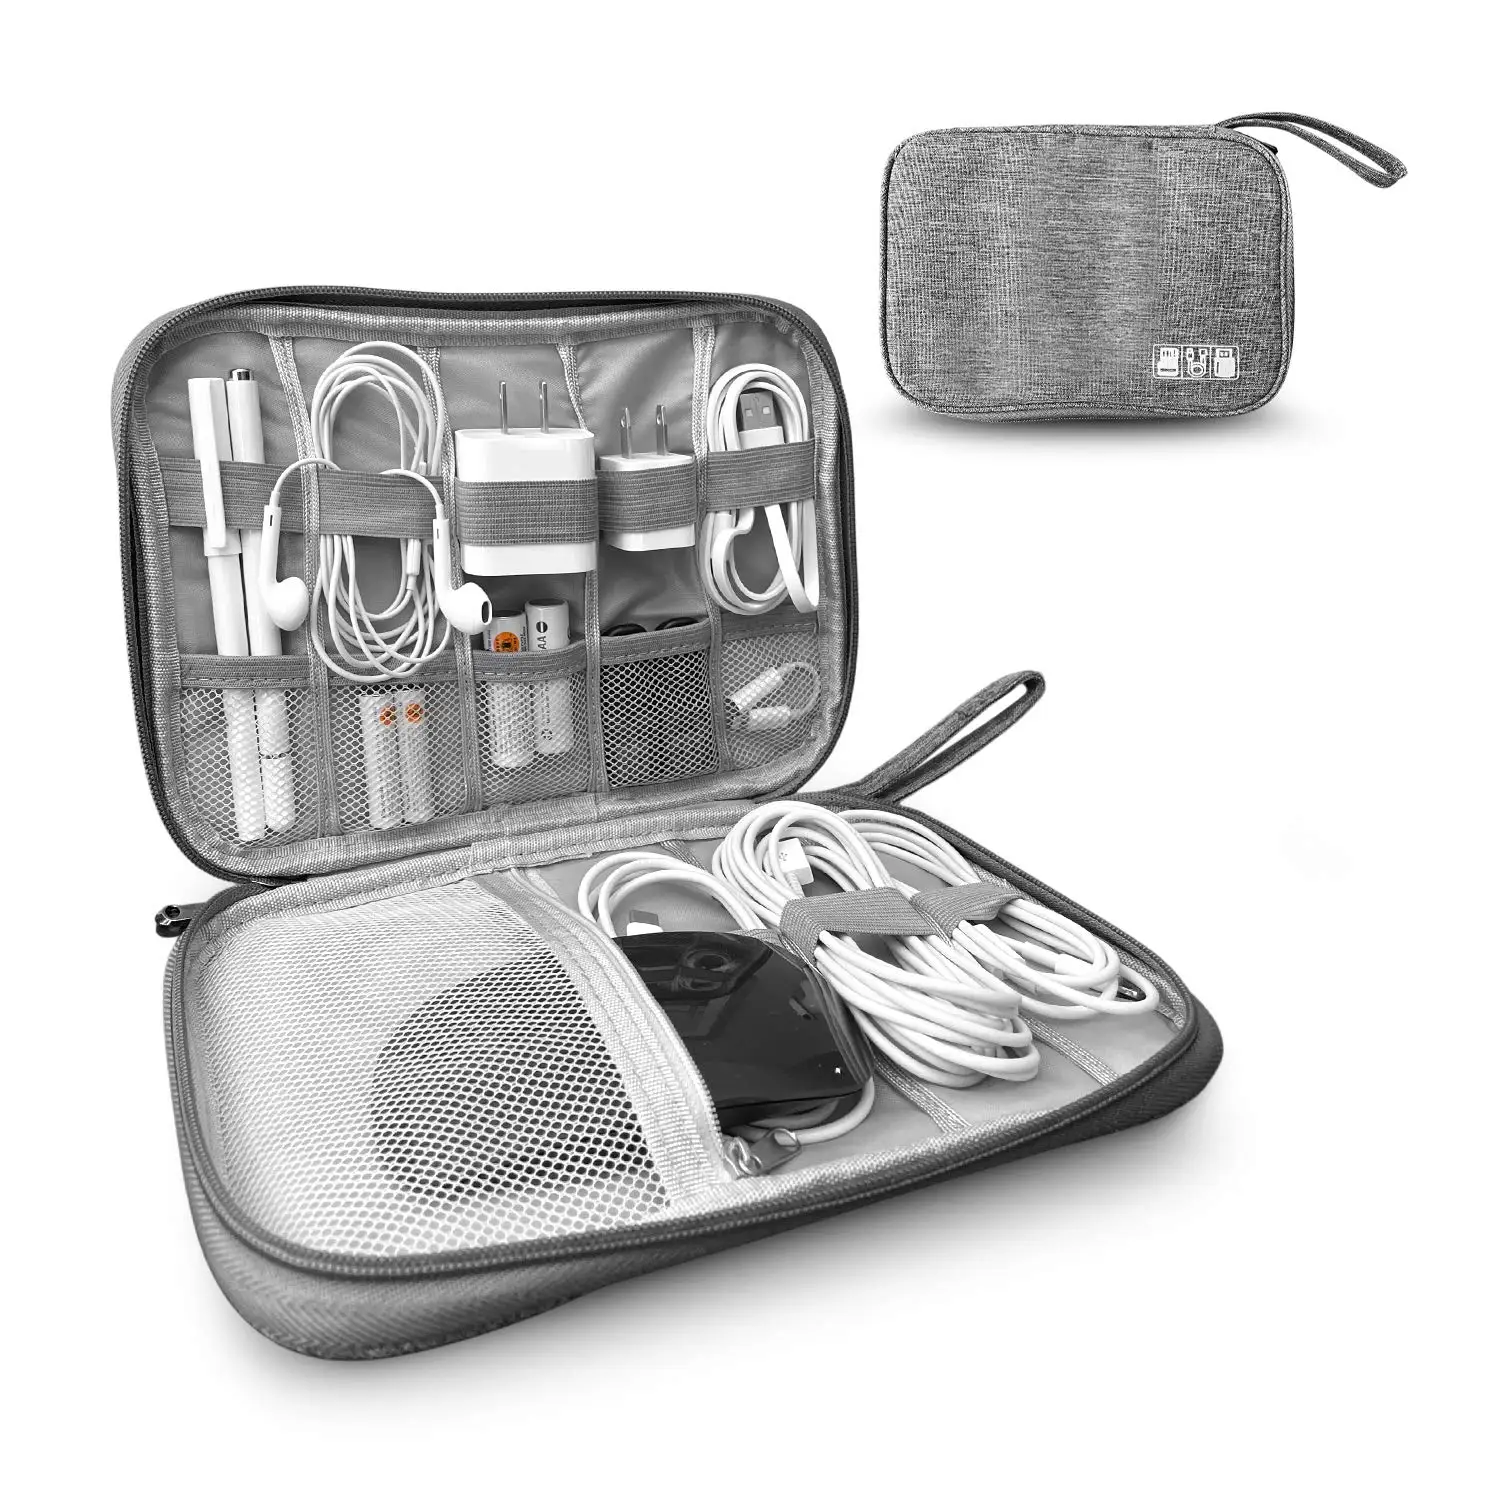 

Electronic Organizer Small Travel Compact Cable Electronics Accessory Case Bag for Hard Drives,Cables,Charger,Cord,USB,Soft Grey